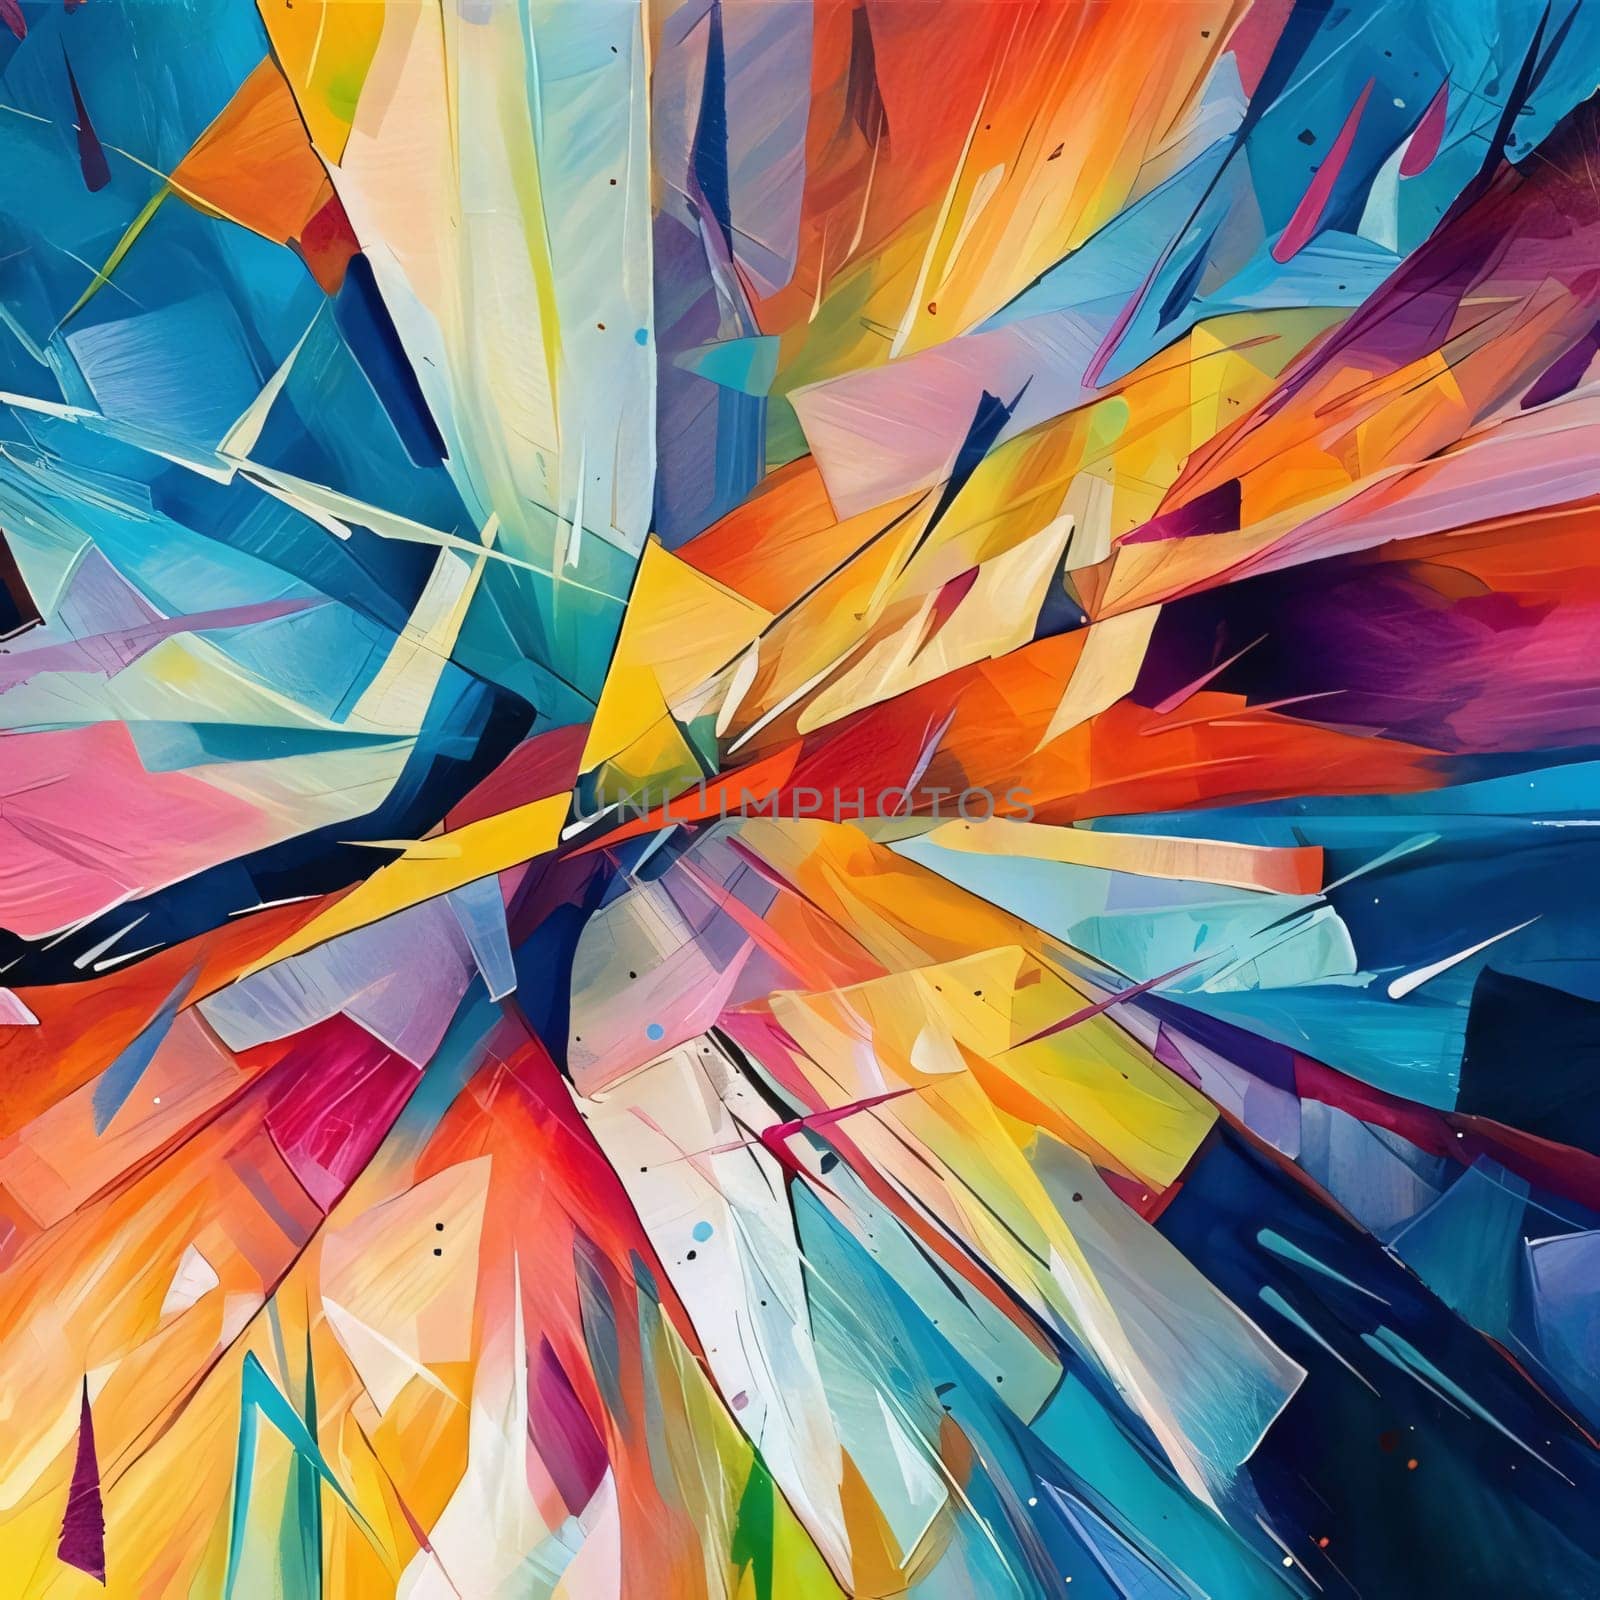 Abstract background design: abstract background with colorful geometric elements, computer-generated illustration.